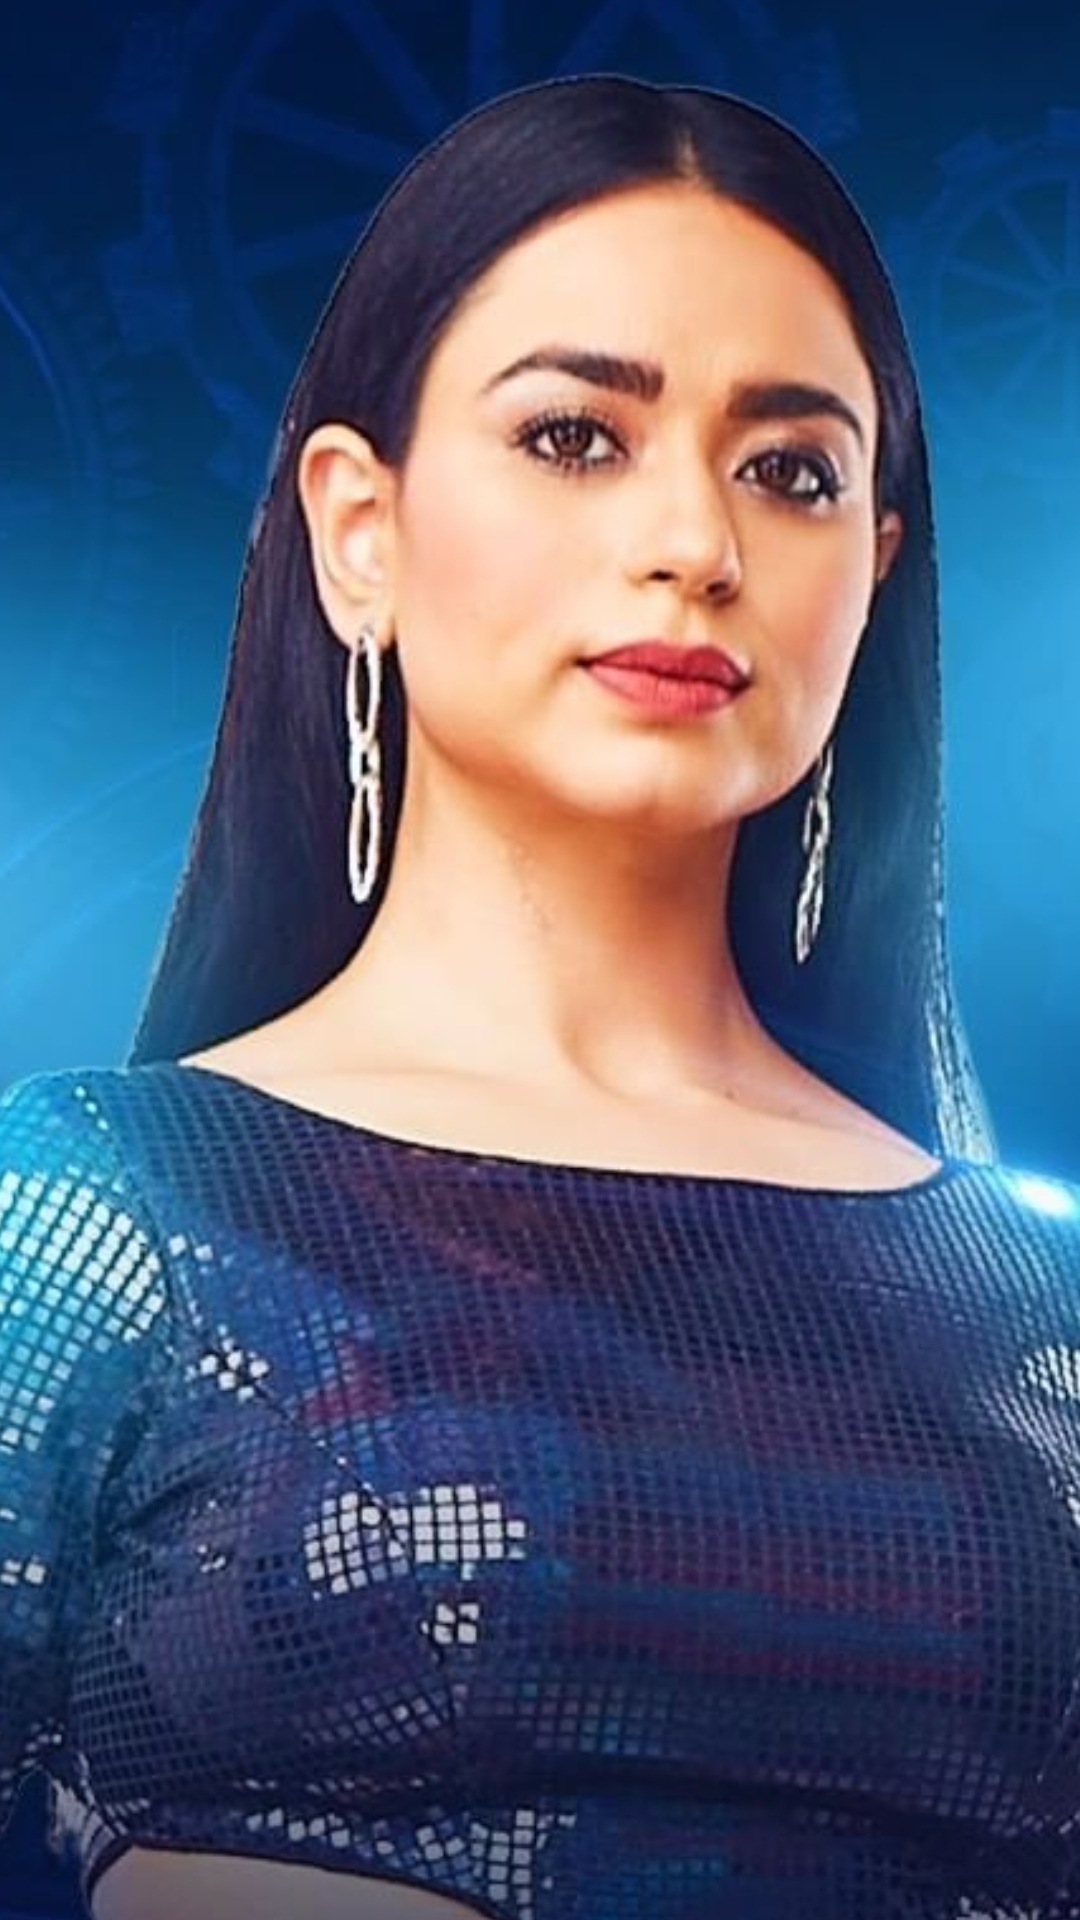 Soundarya Sharma's journey on Bigg Boss 16 reporetdly came to an end after receiving the lowest number of votes from viewers.